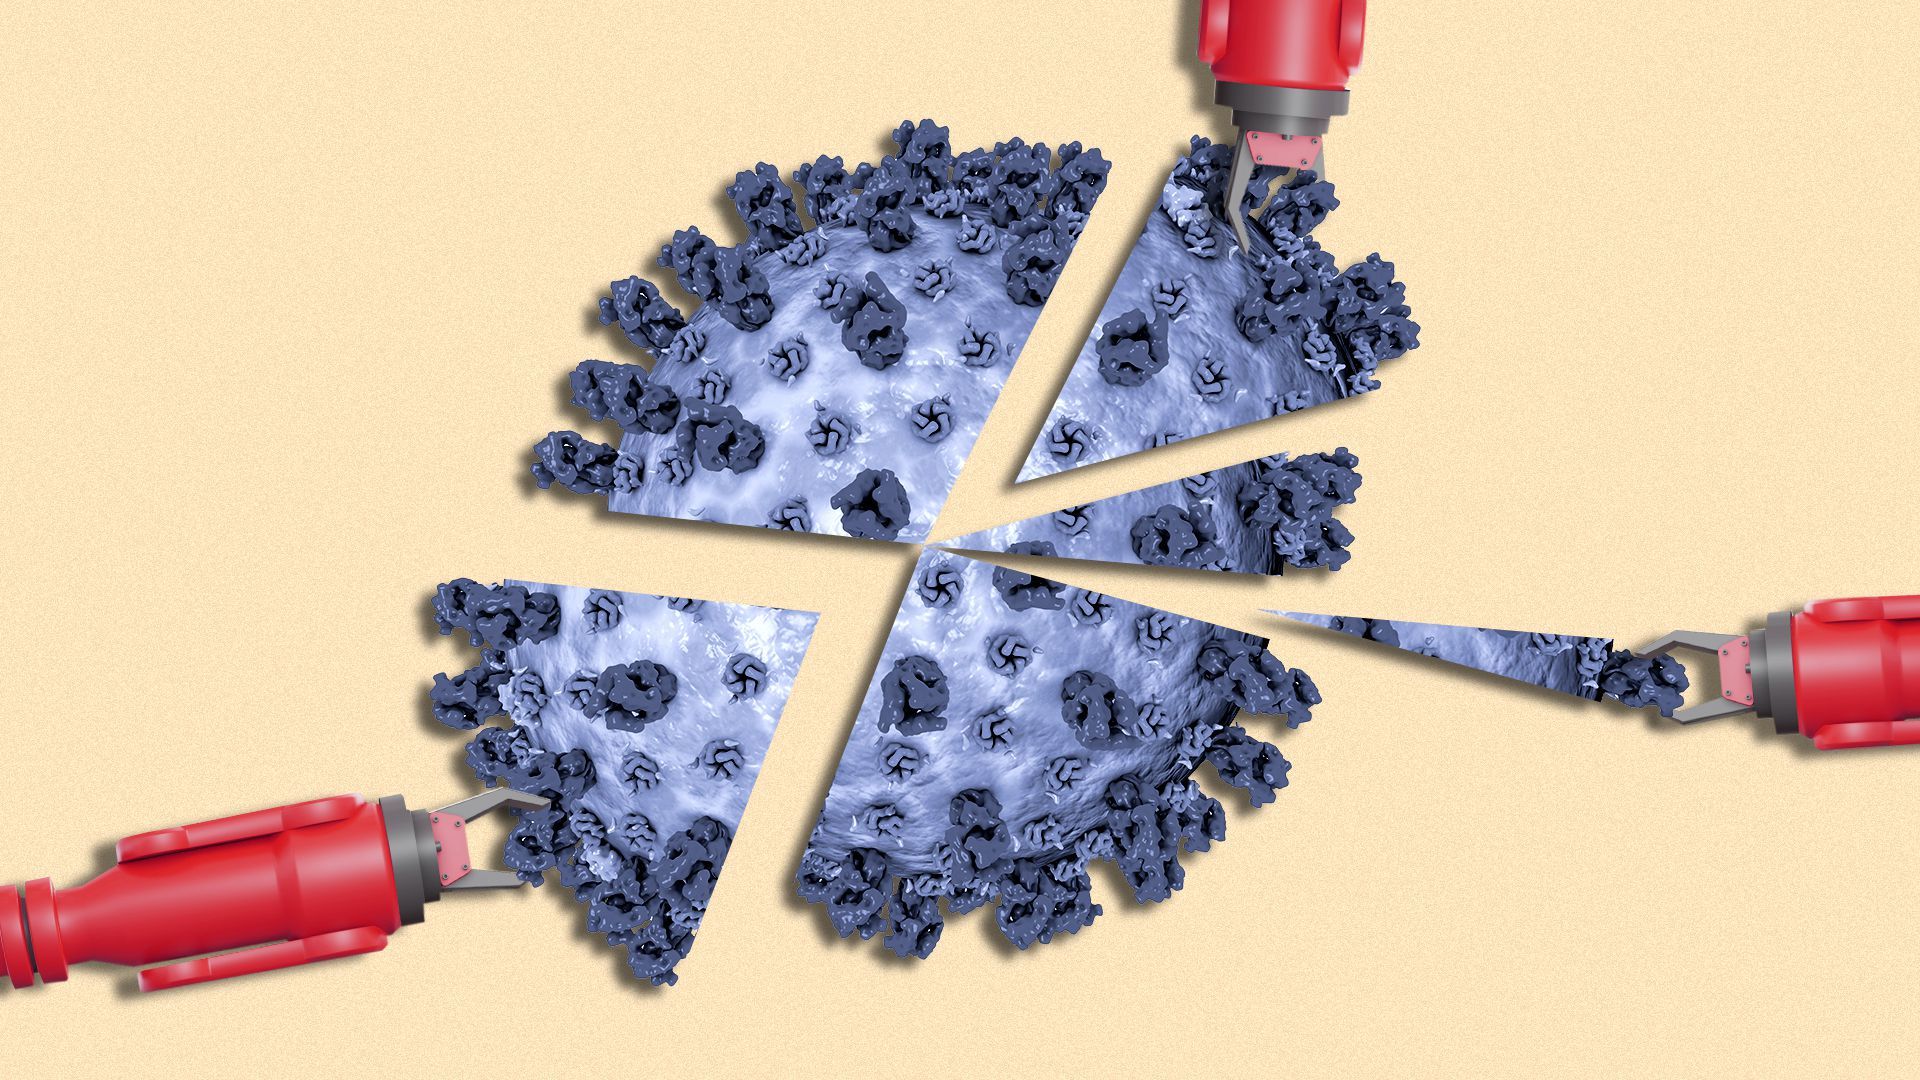 Illustration of a virus being assembled by robot arms